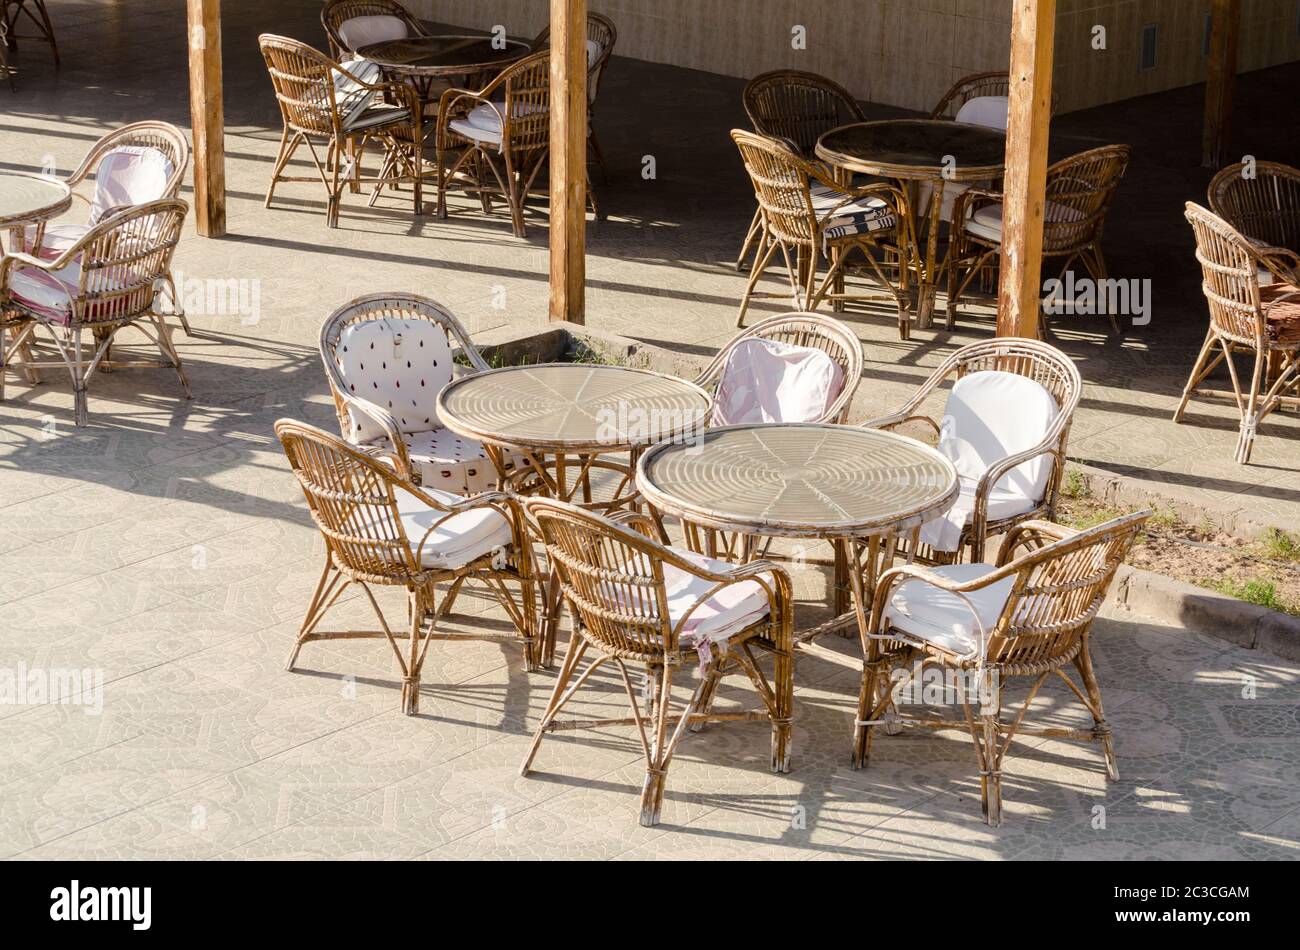 wooden chairs and round tables in an empty hotel cafe in Egypt Dahab South Sinai Stock Photo